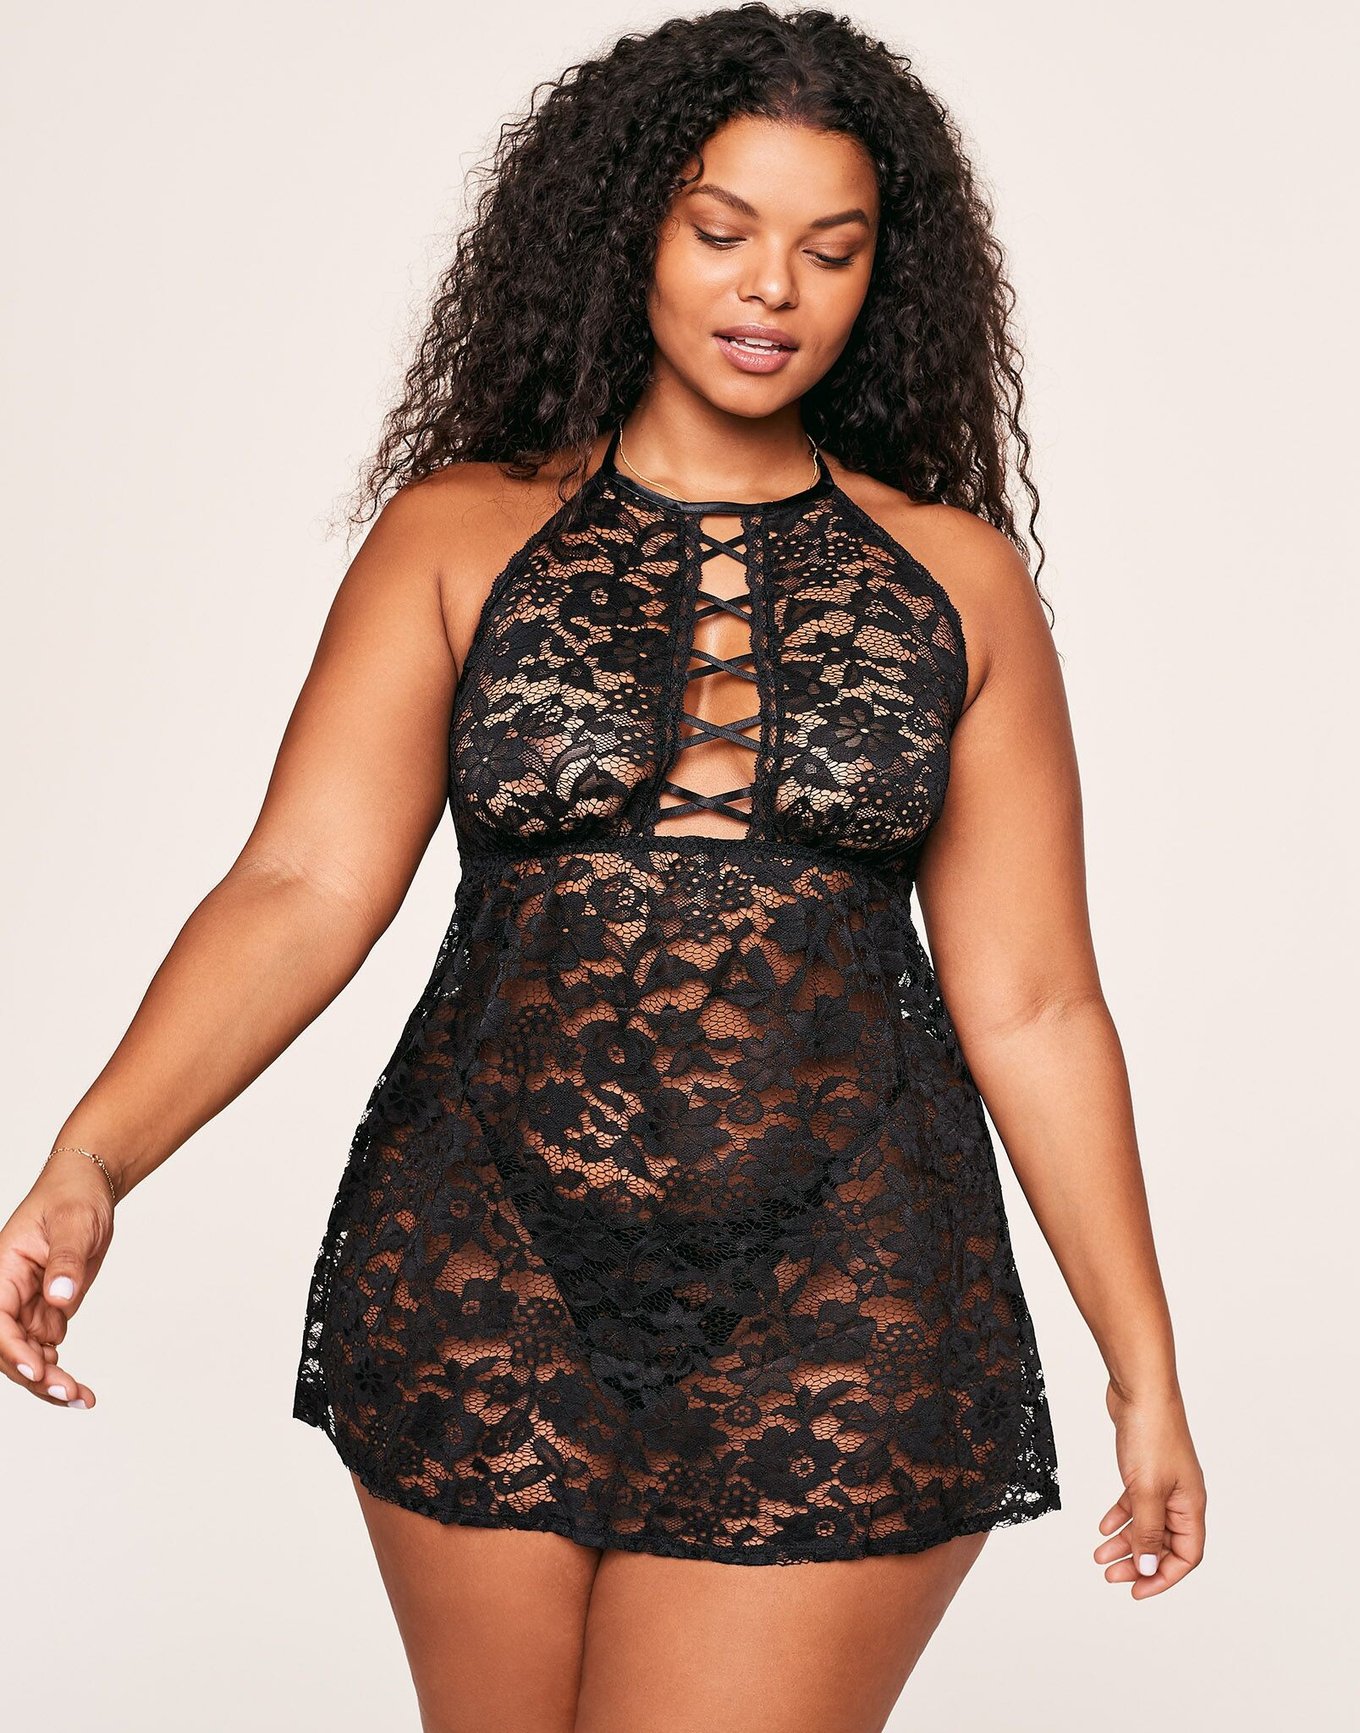 Lenceria Style Lengery Hot Bralette Big Cup XL Plus Size Sexy Lace